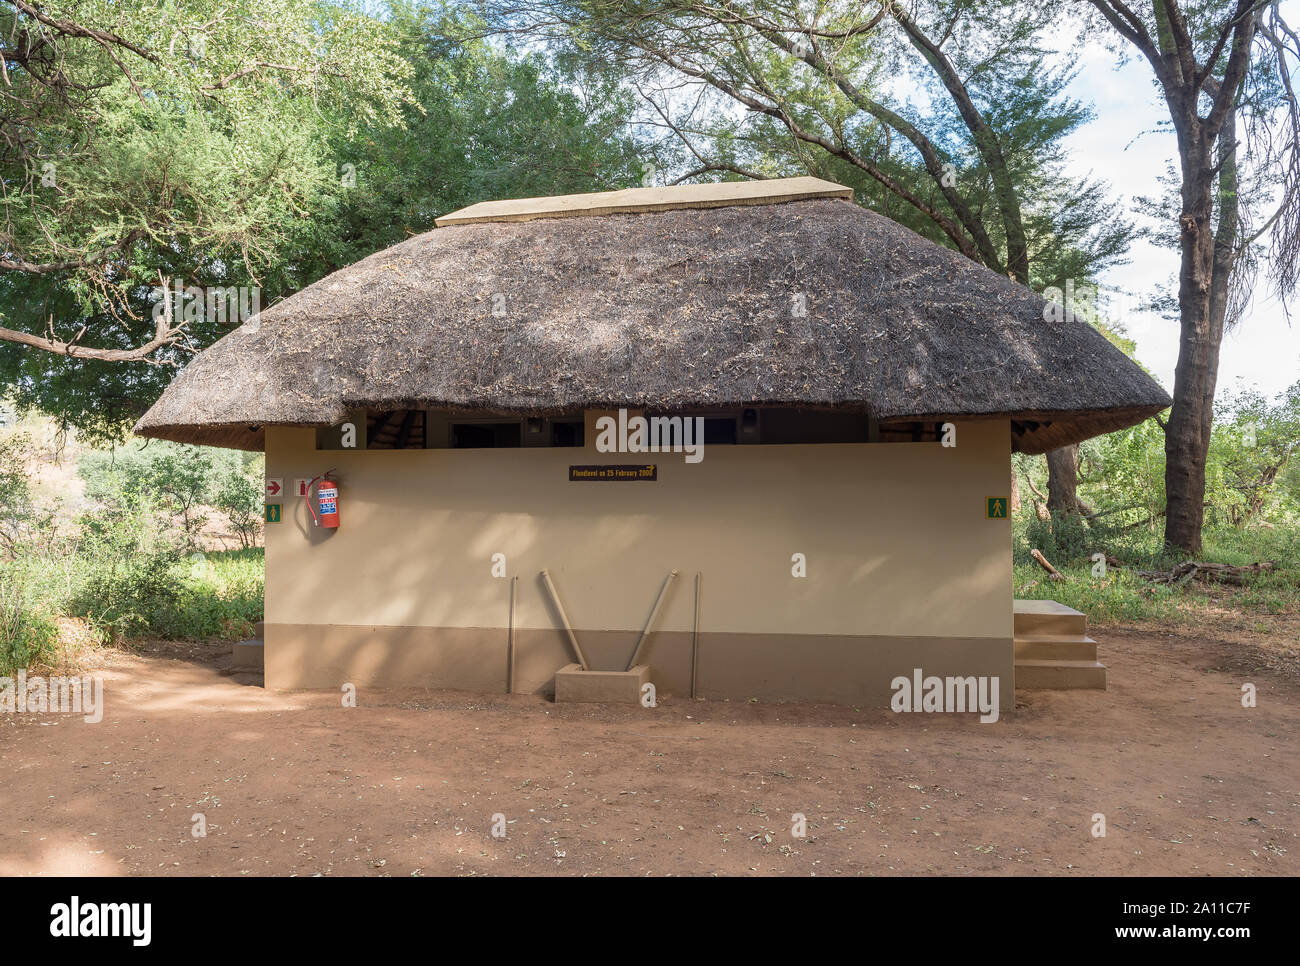 KRUGER NATIONAL PARK, SOUTH AFRICA - MAY 15, 2019: Toilet facilities at the Pafuri Picnic Site. A fire extinguisher and the 2000 flood level are visib Stock Photo